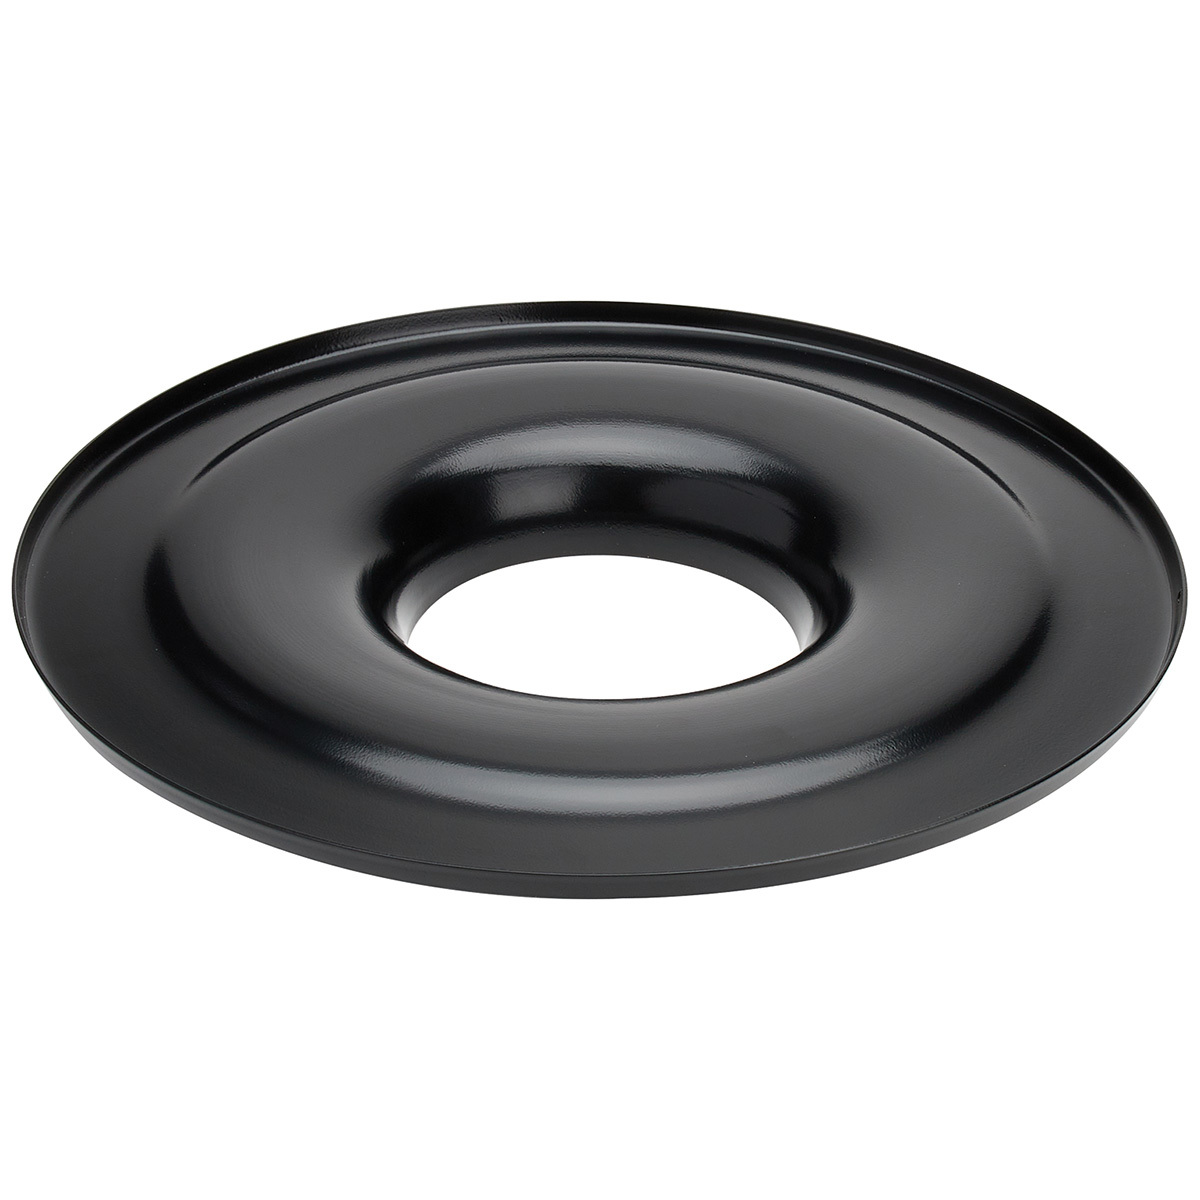 Allstar Performance 25957 Air Cleaner Base, Lightweight, 14 in Round, 5-1/8 in Carb Flange, Aluminum, Black Anodized, Each